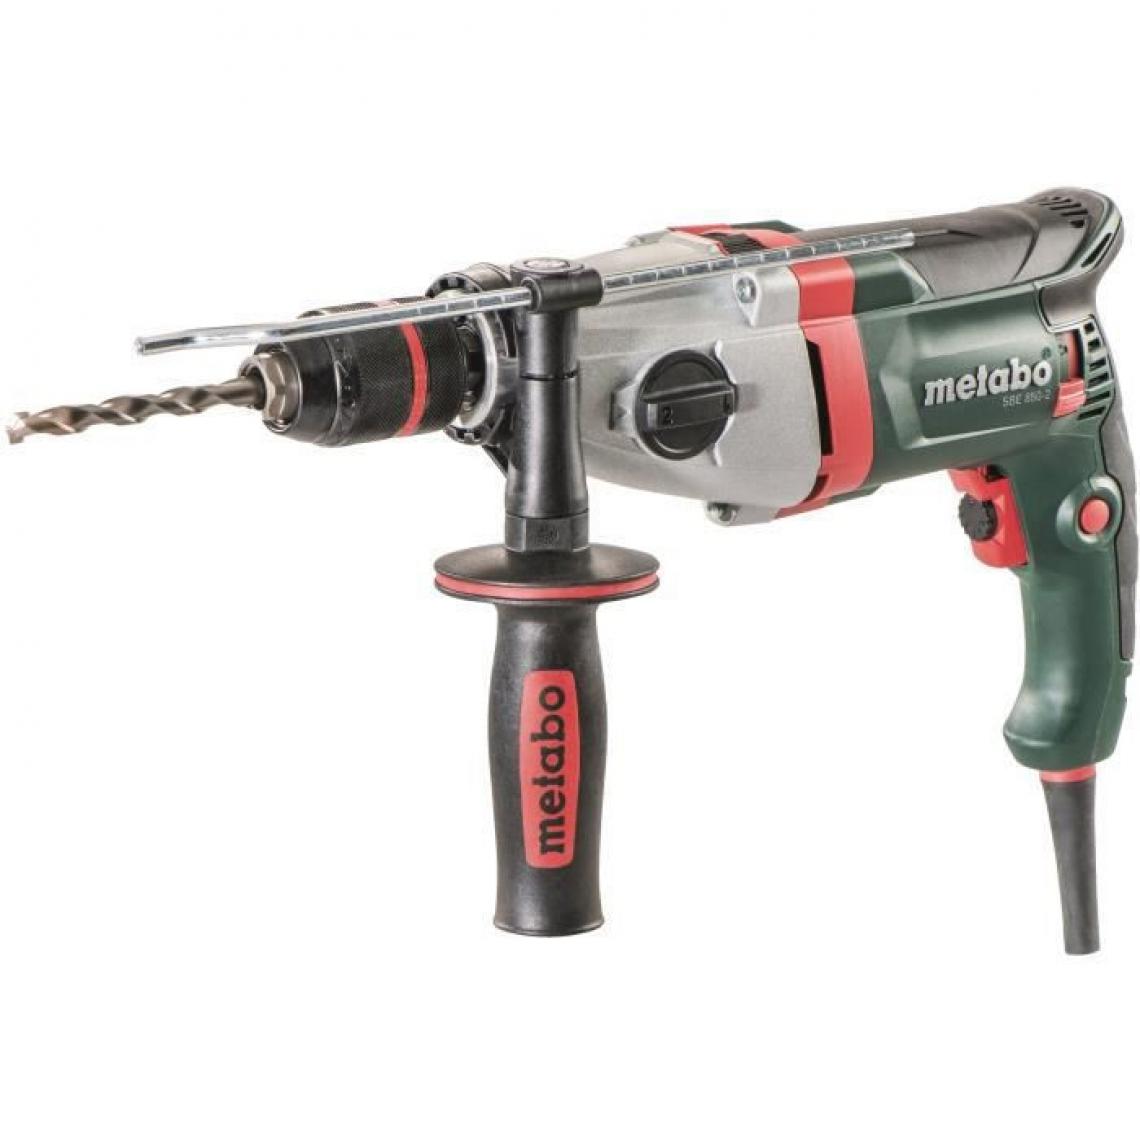 Metabo - Perceuse a percussion Filaire - METABO - SBE 850-2 - Perceuses, visseuses filaires